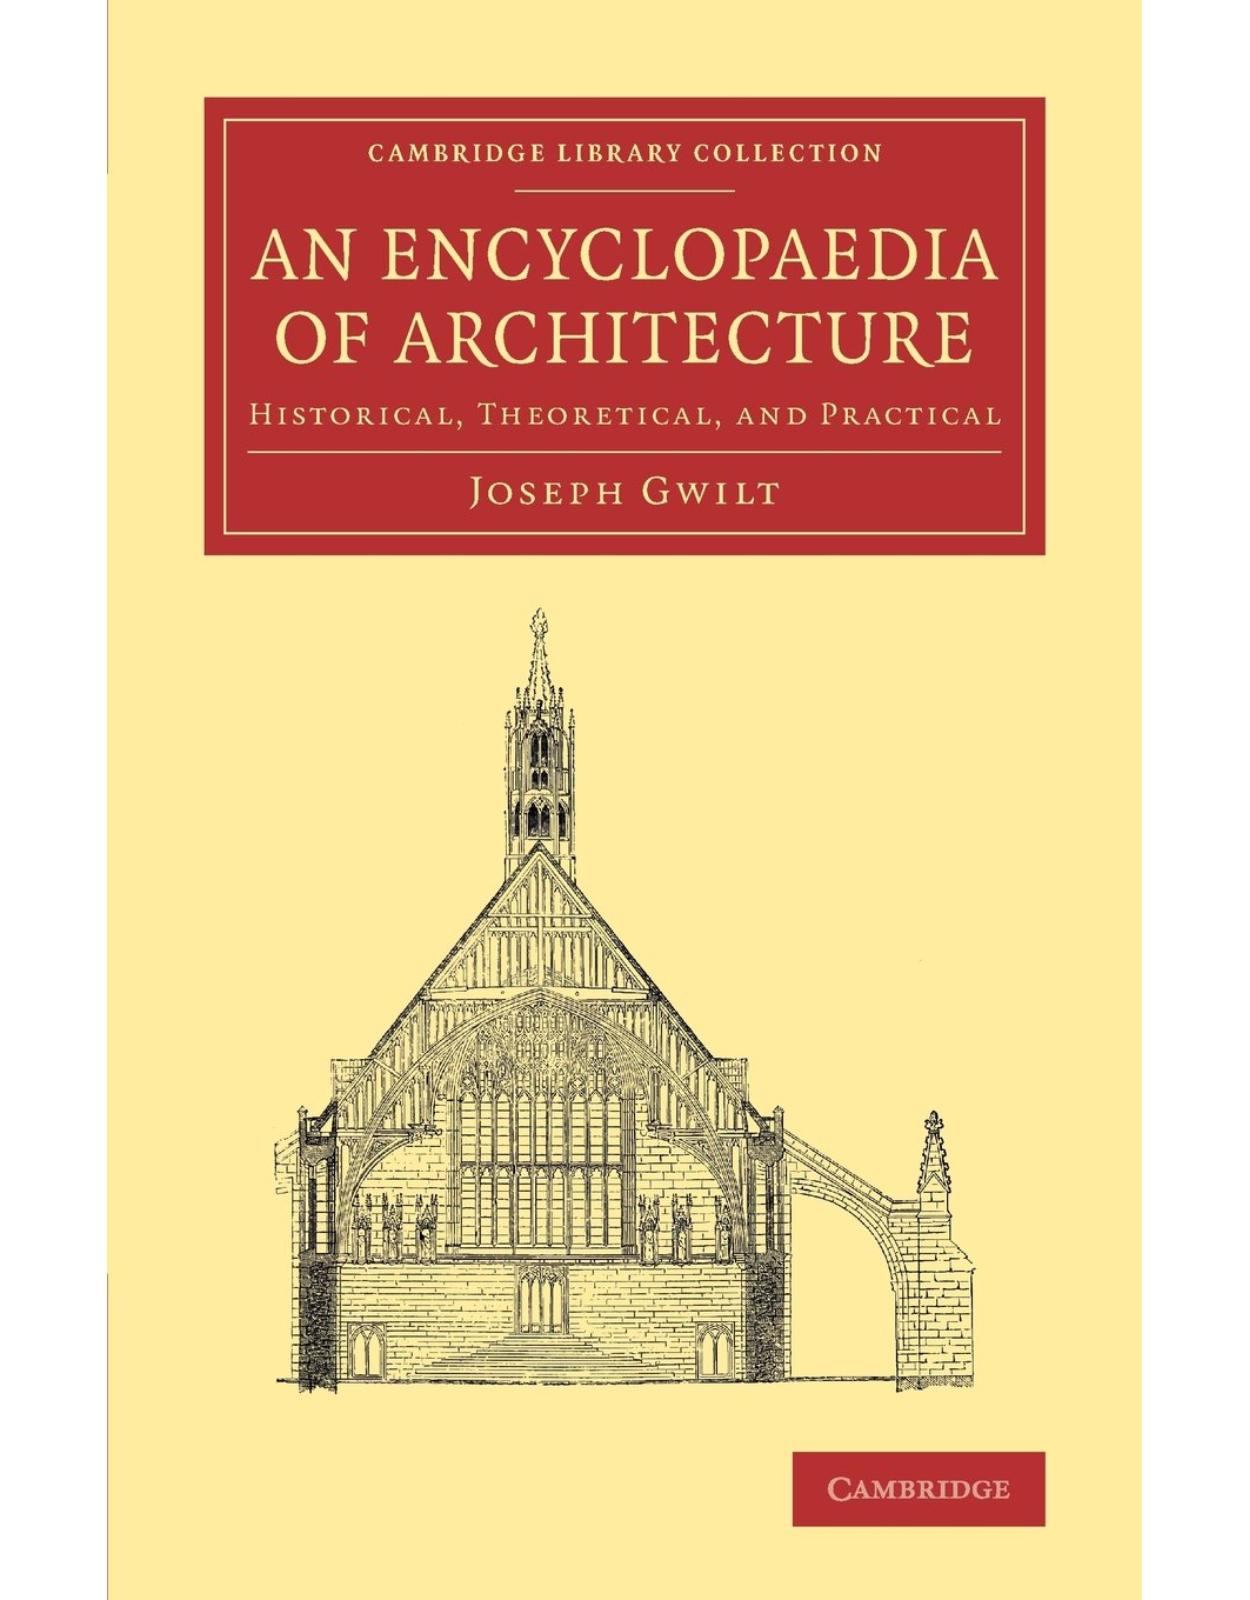 An Encyclopaedia of Architecture: Historical, Theoretical, and Practical (Cambridge Library Collection - Art and Architecture)